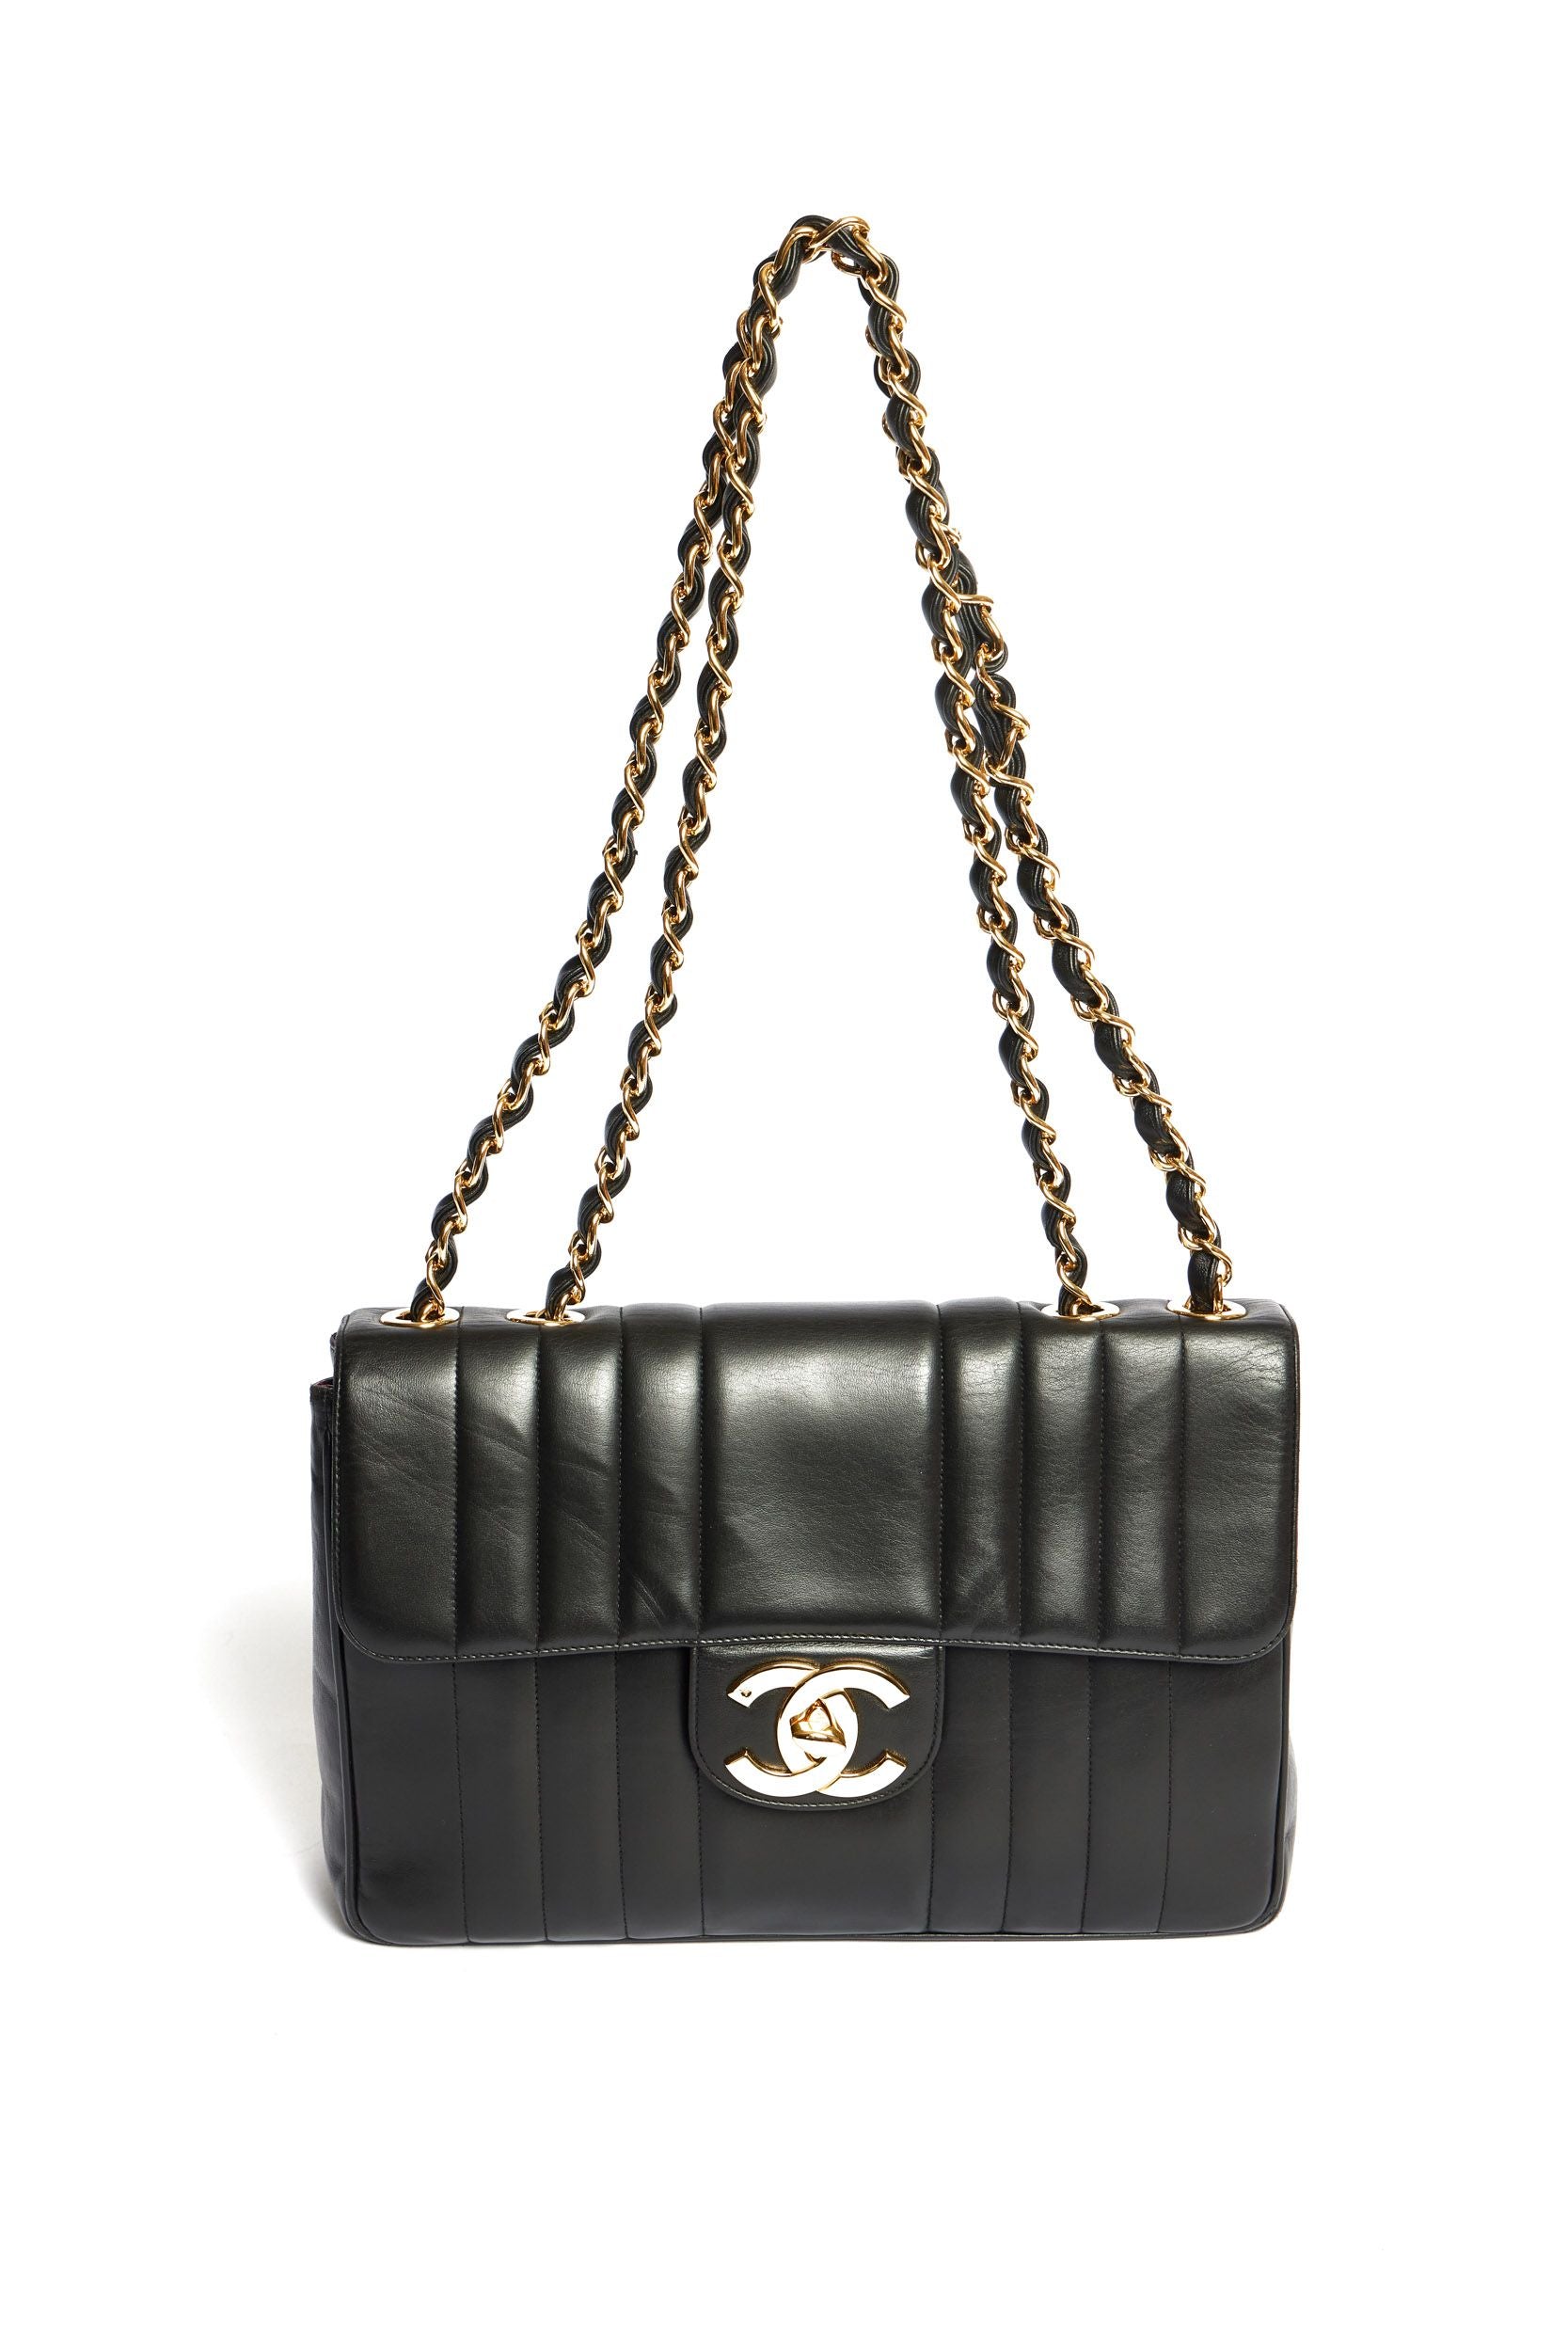 chanel vertical quilted bag